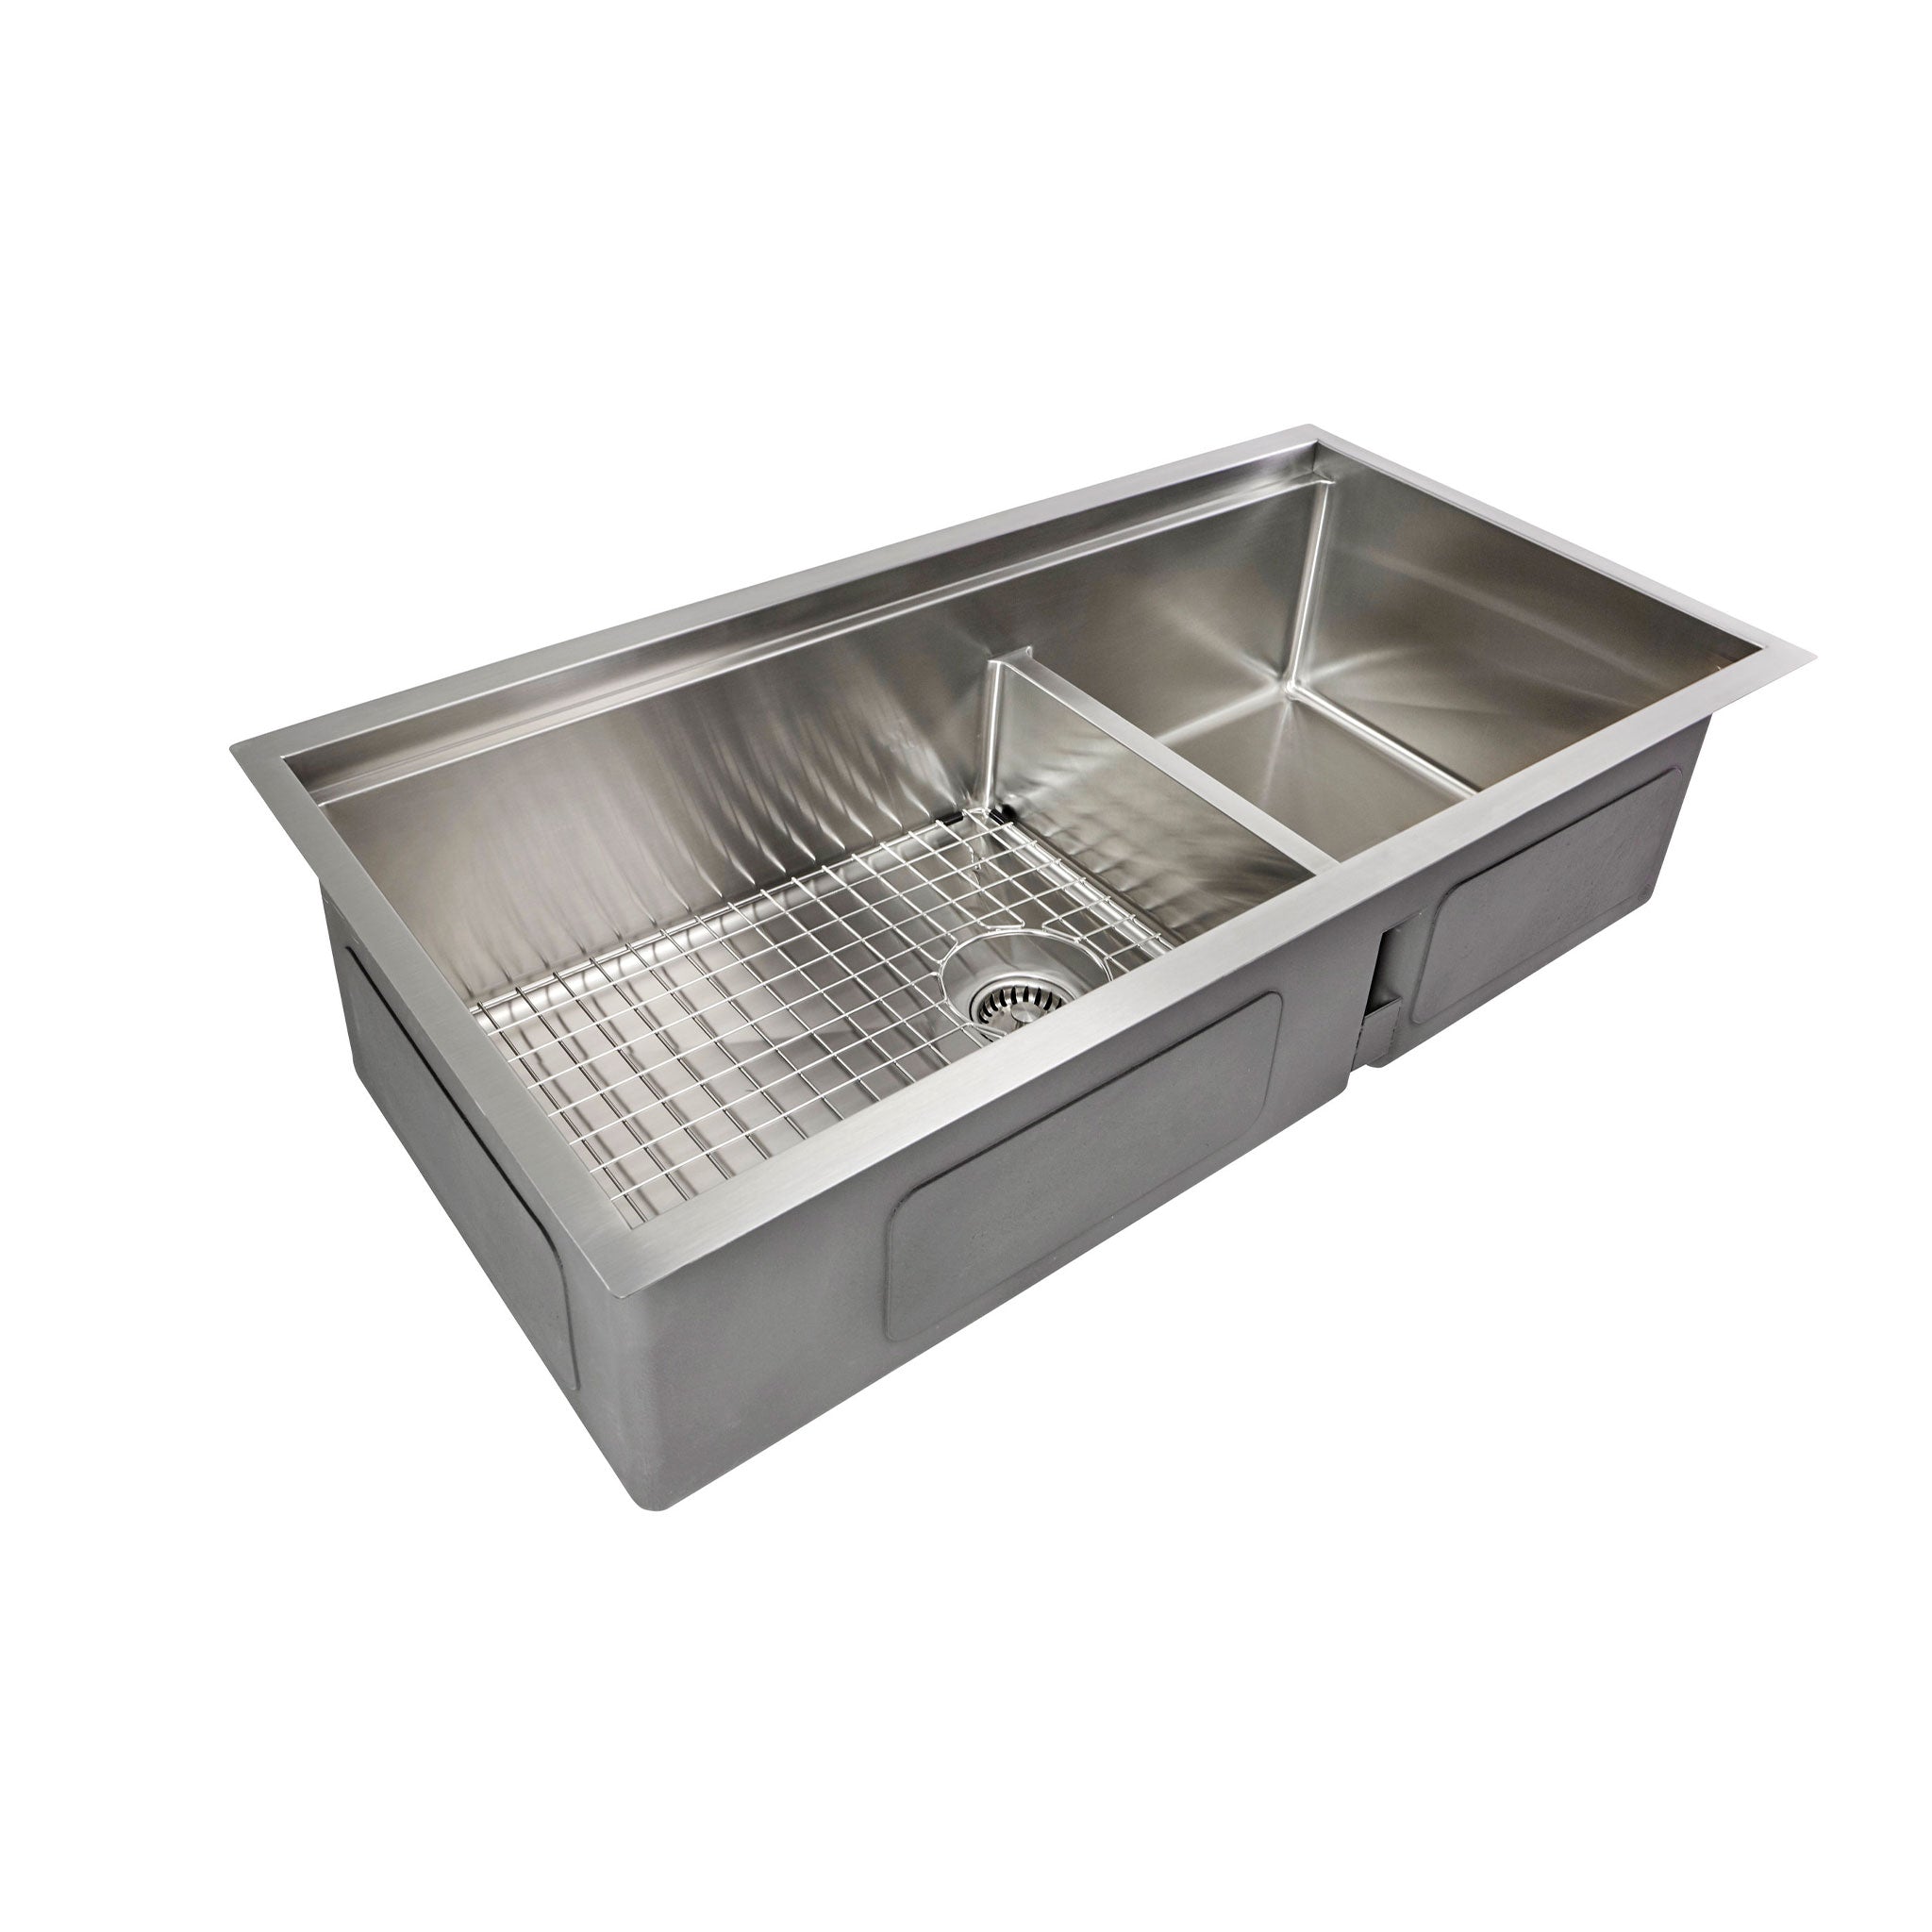 Reversible 39" Workstation Sink with Dual Basin, Protective Grid and Seamless Drains